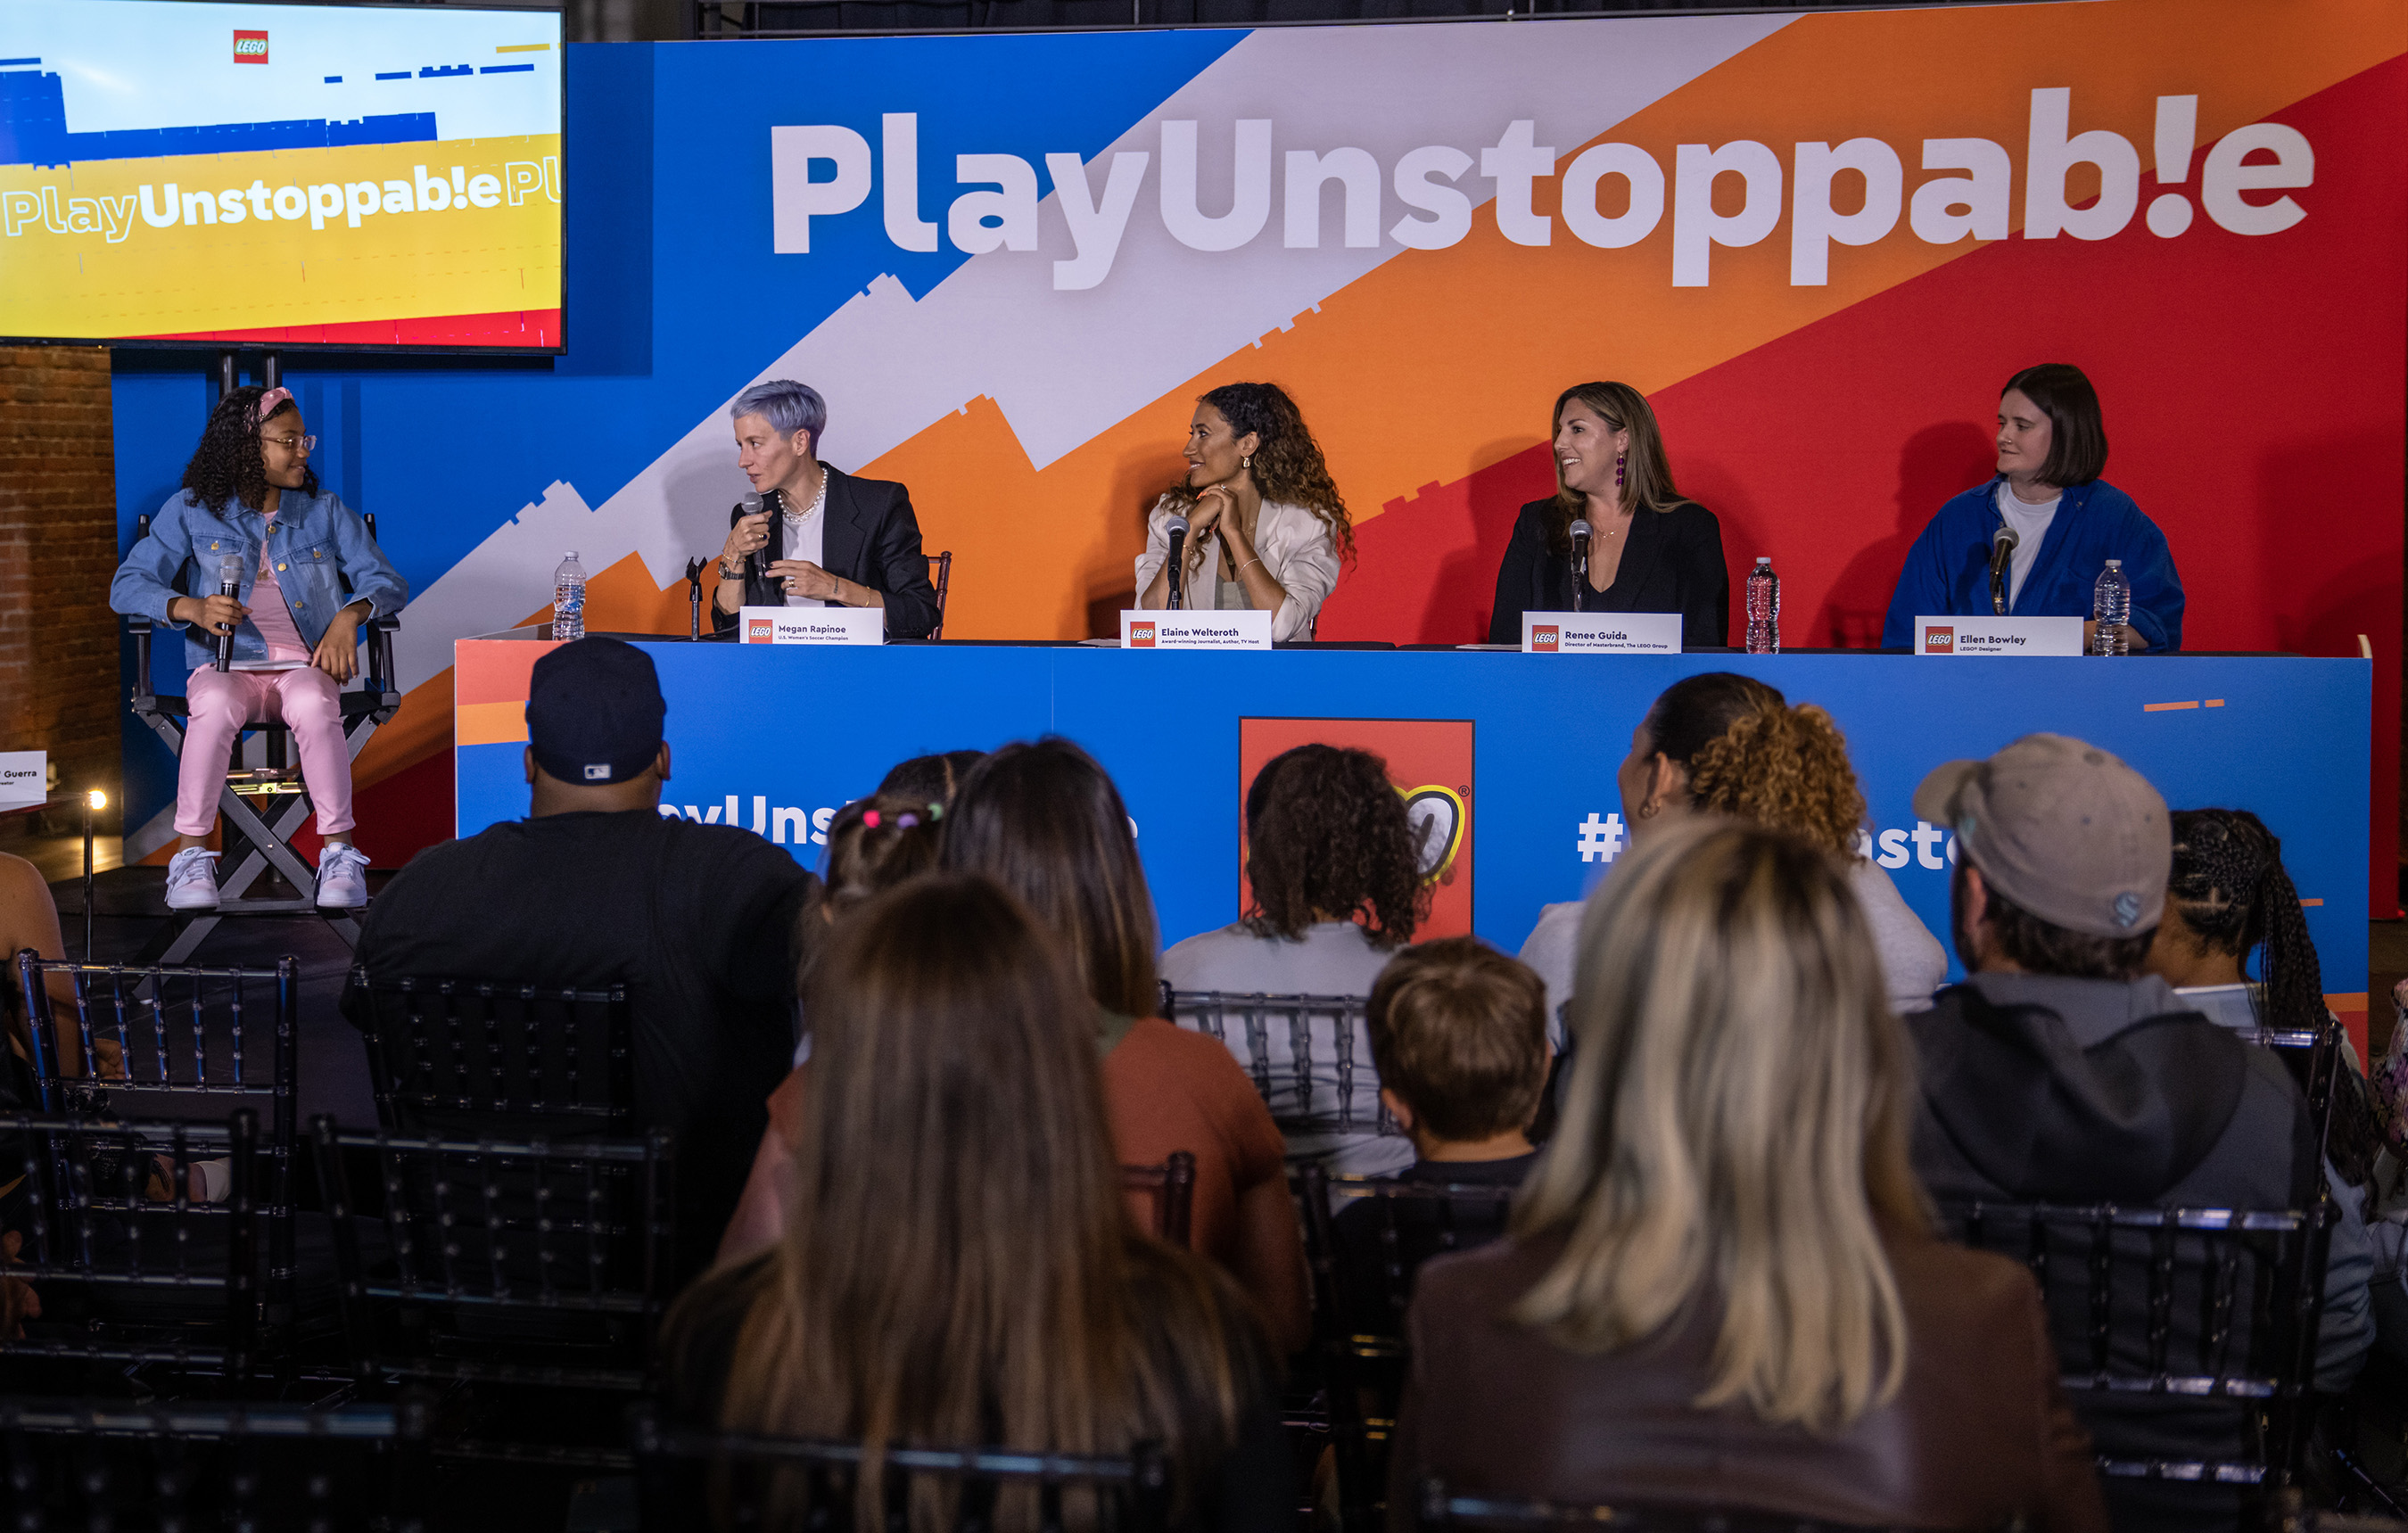 Kid reporter Jazlyn 'Jazzy' Guerra, far left, moderates a panel with the LEGO Group's Team Unstoppable co-captains Megan Rapinoe, second from left, and Elaine Welteroth, center, Americas director of Masterbrand at the LEGO Group, Renee Guida, second from right, and LEGO Friends designer Ellen Bowley during the LEGO Group’s Play Unstoppable press conference on Friday, June 2, 2023 in Seattle (Stephen Brashear/AP Images for The LEGO Group)